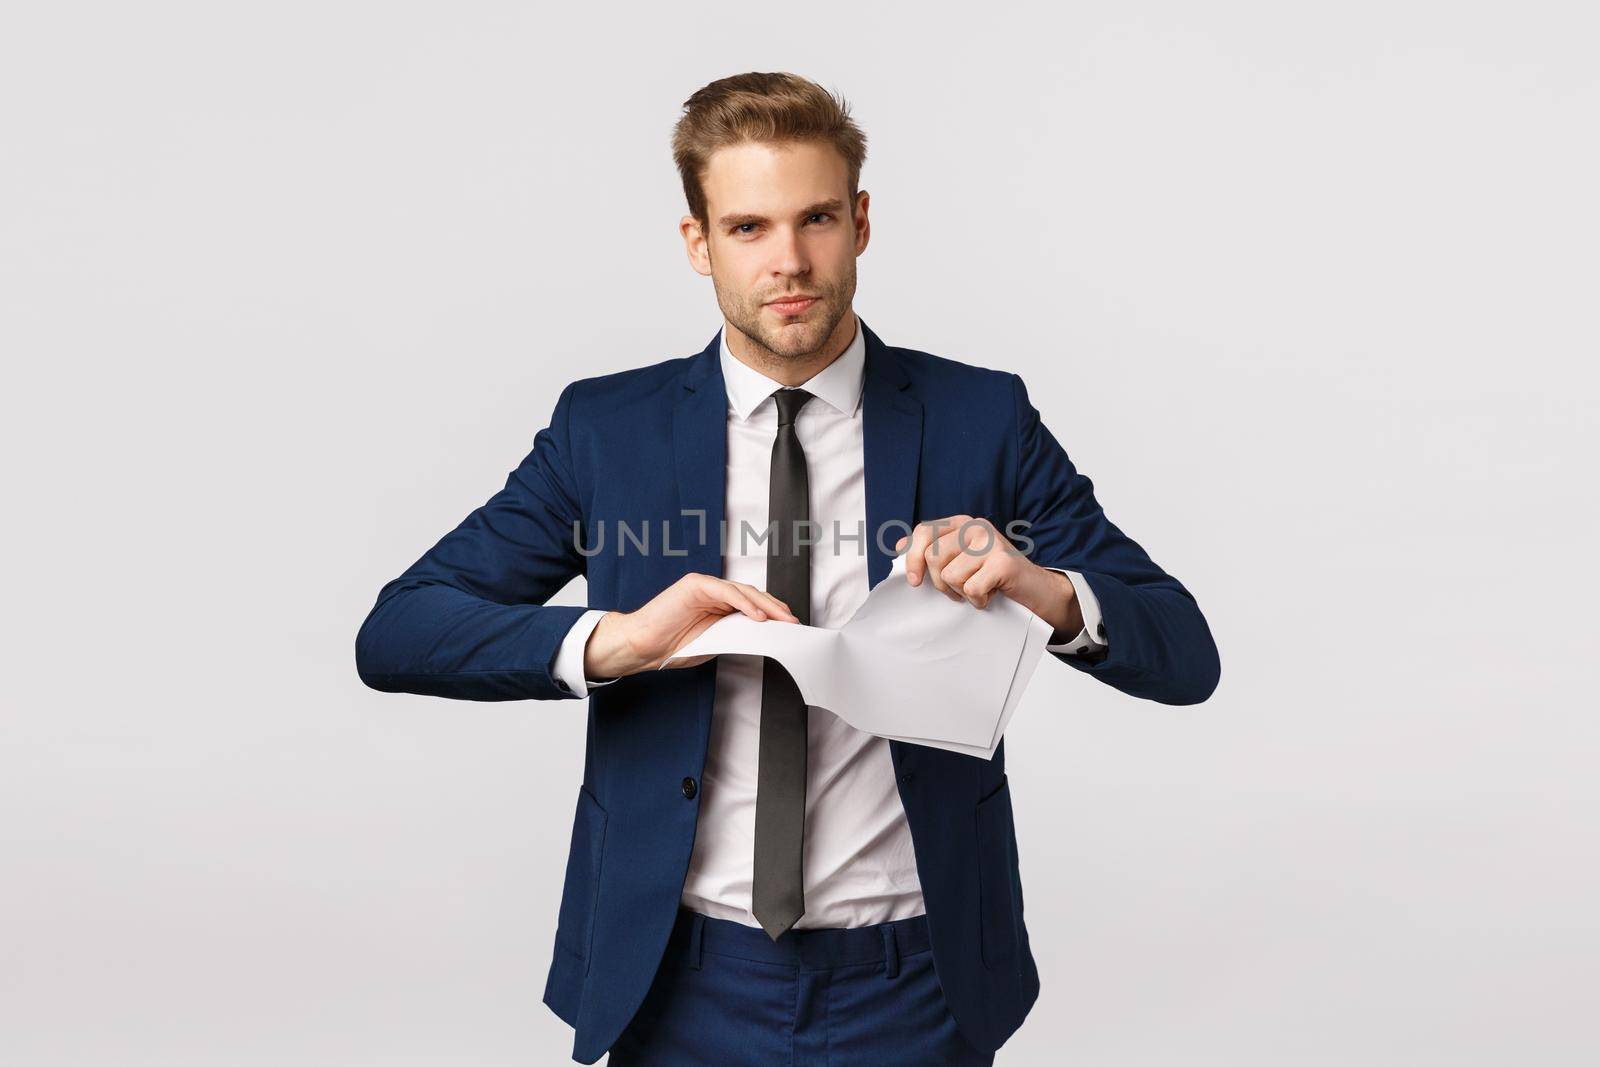 Guy fed up working, quit job. Displeased arrogant young snobbish businessman in classic suit, ripping documents, destroy report and smiling pissed, standing white background smirking.